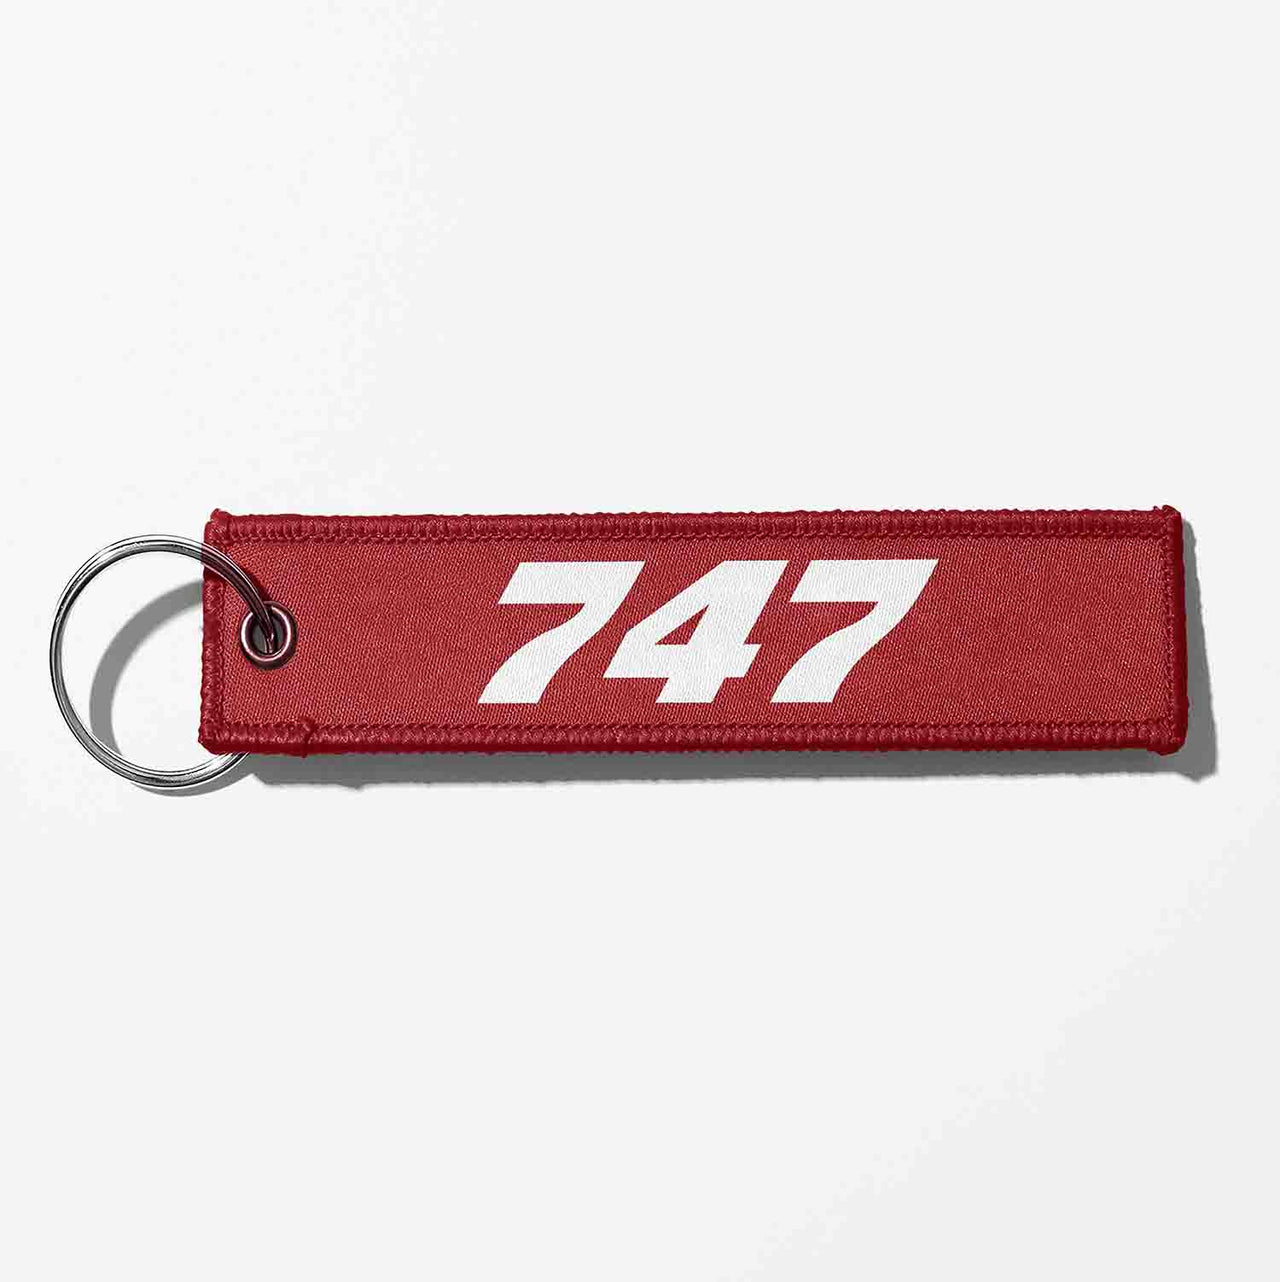 Boeing 747 Flat Text Designed Key Chains